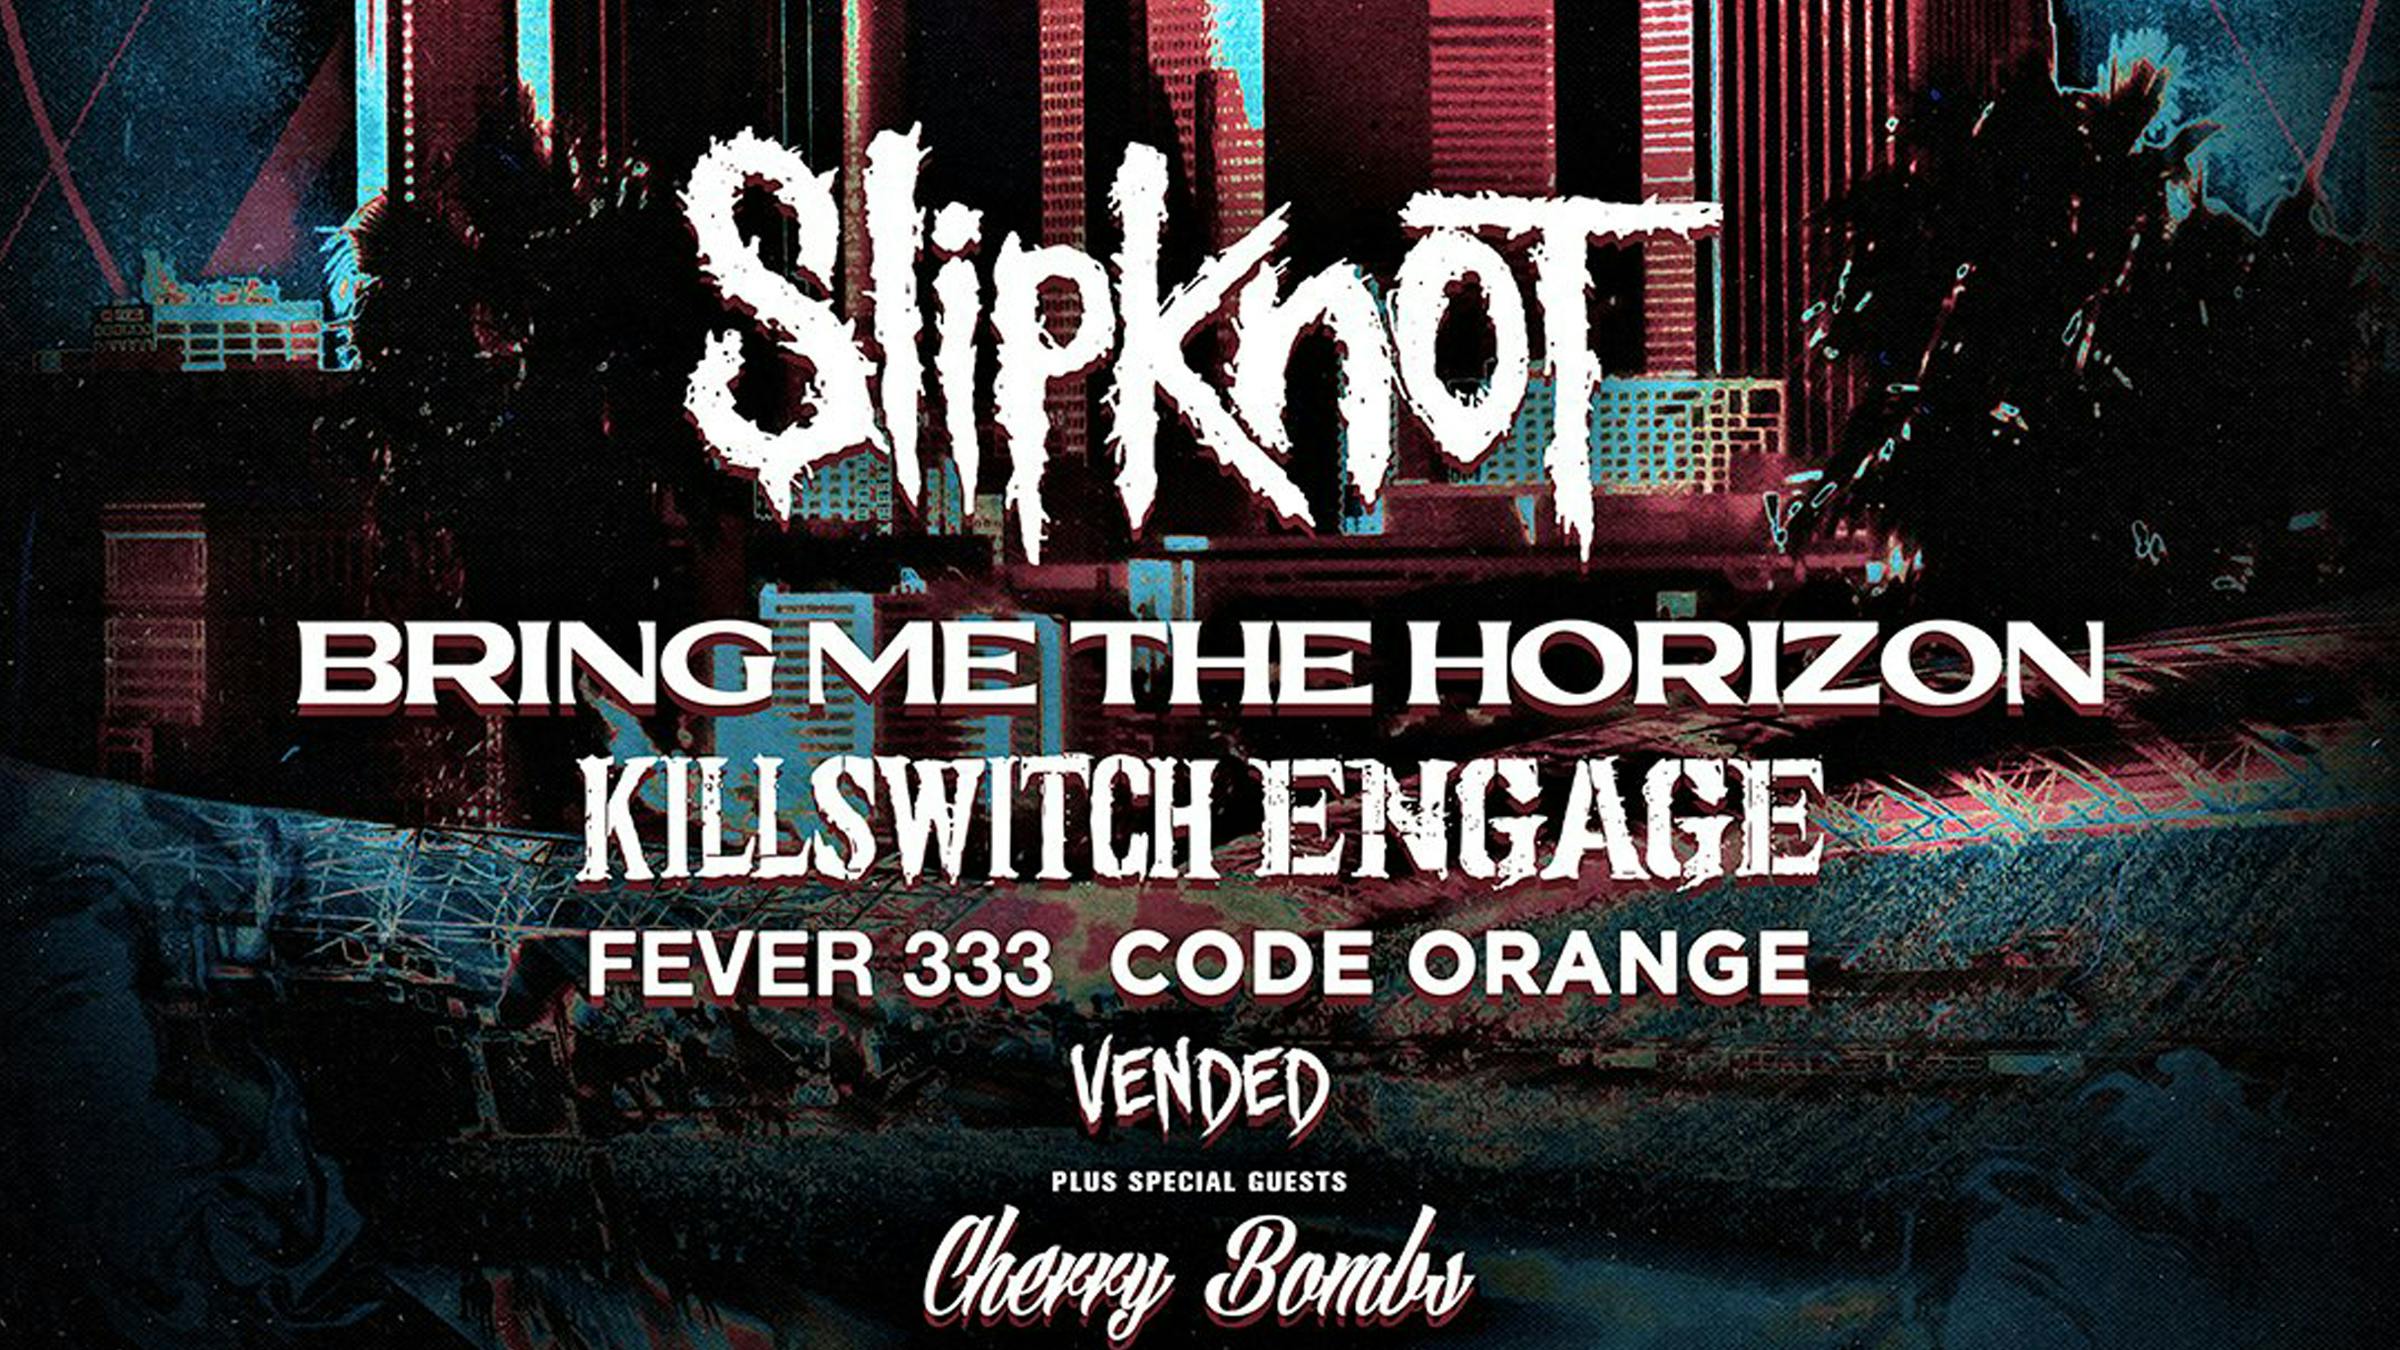 Slipknot, Bring Me The Horizon and more to play Knotfest Los Angeles